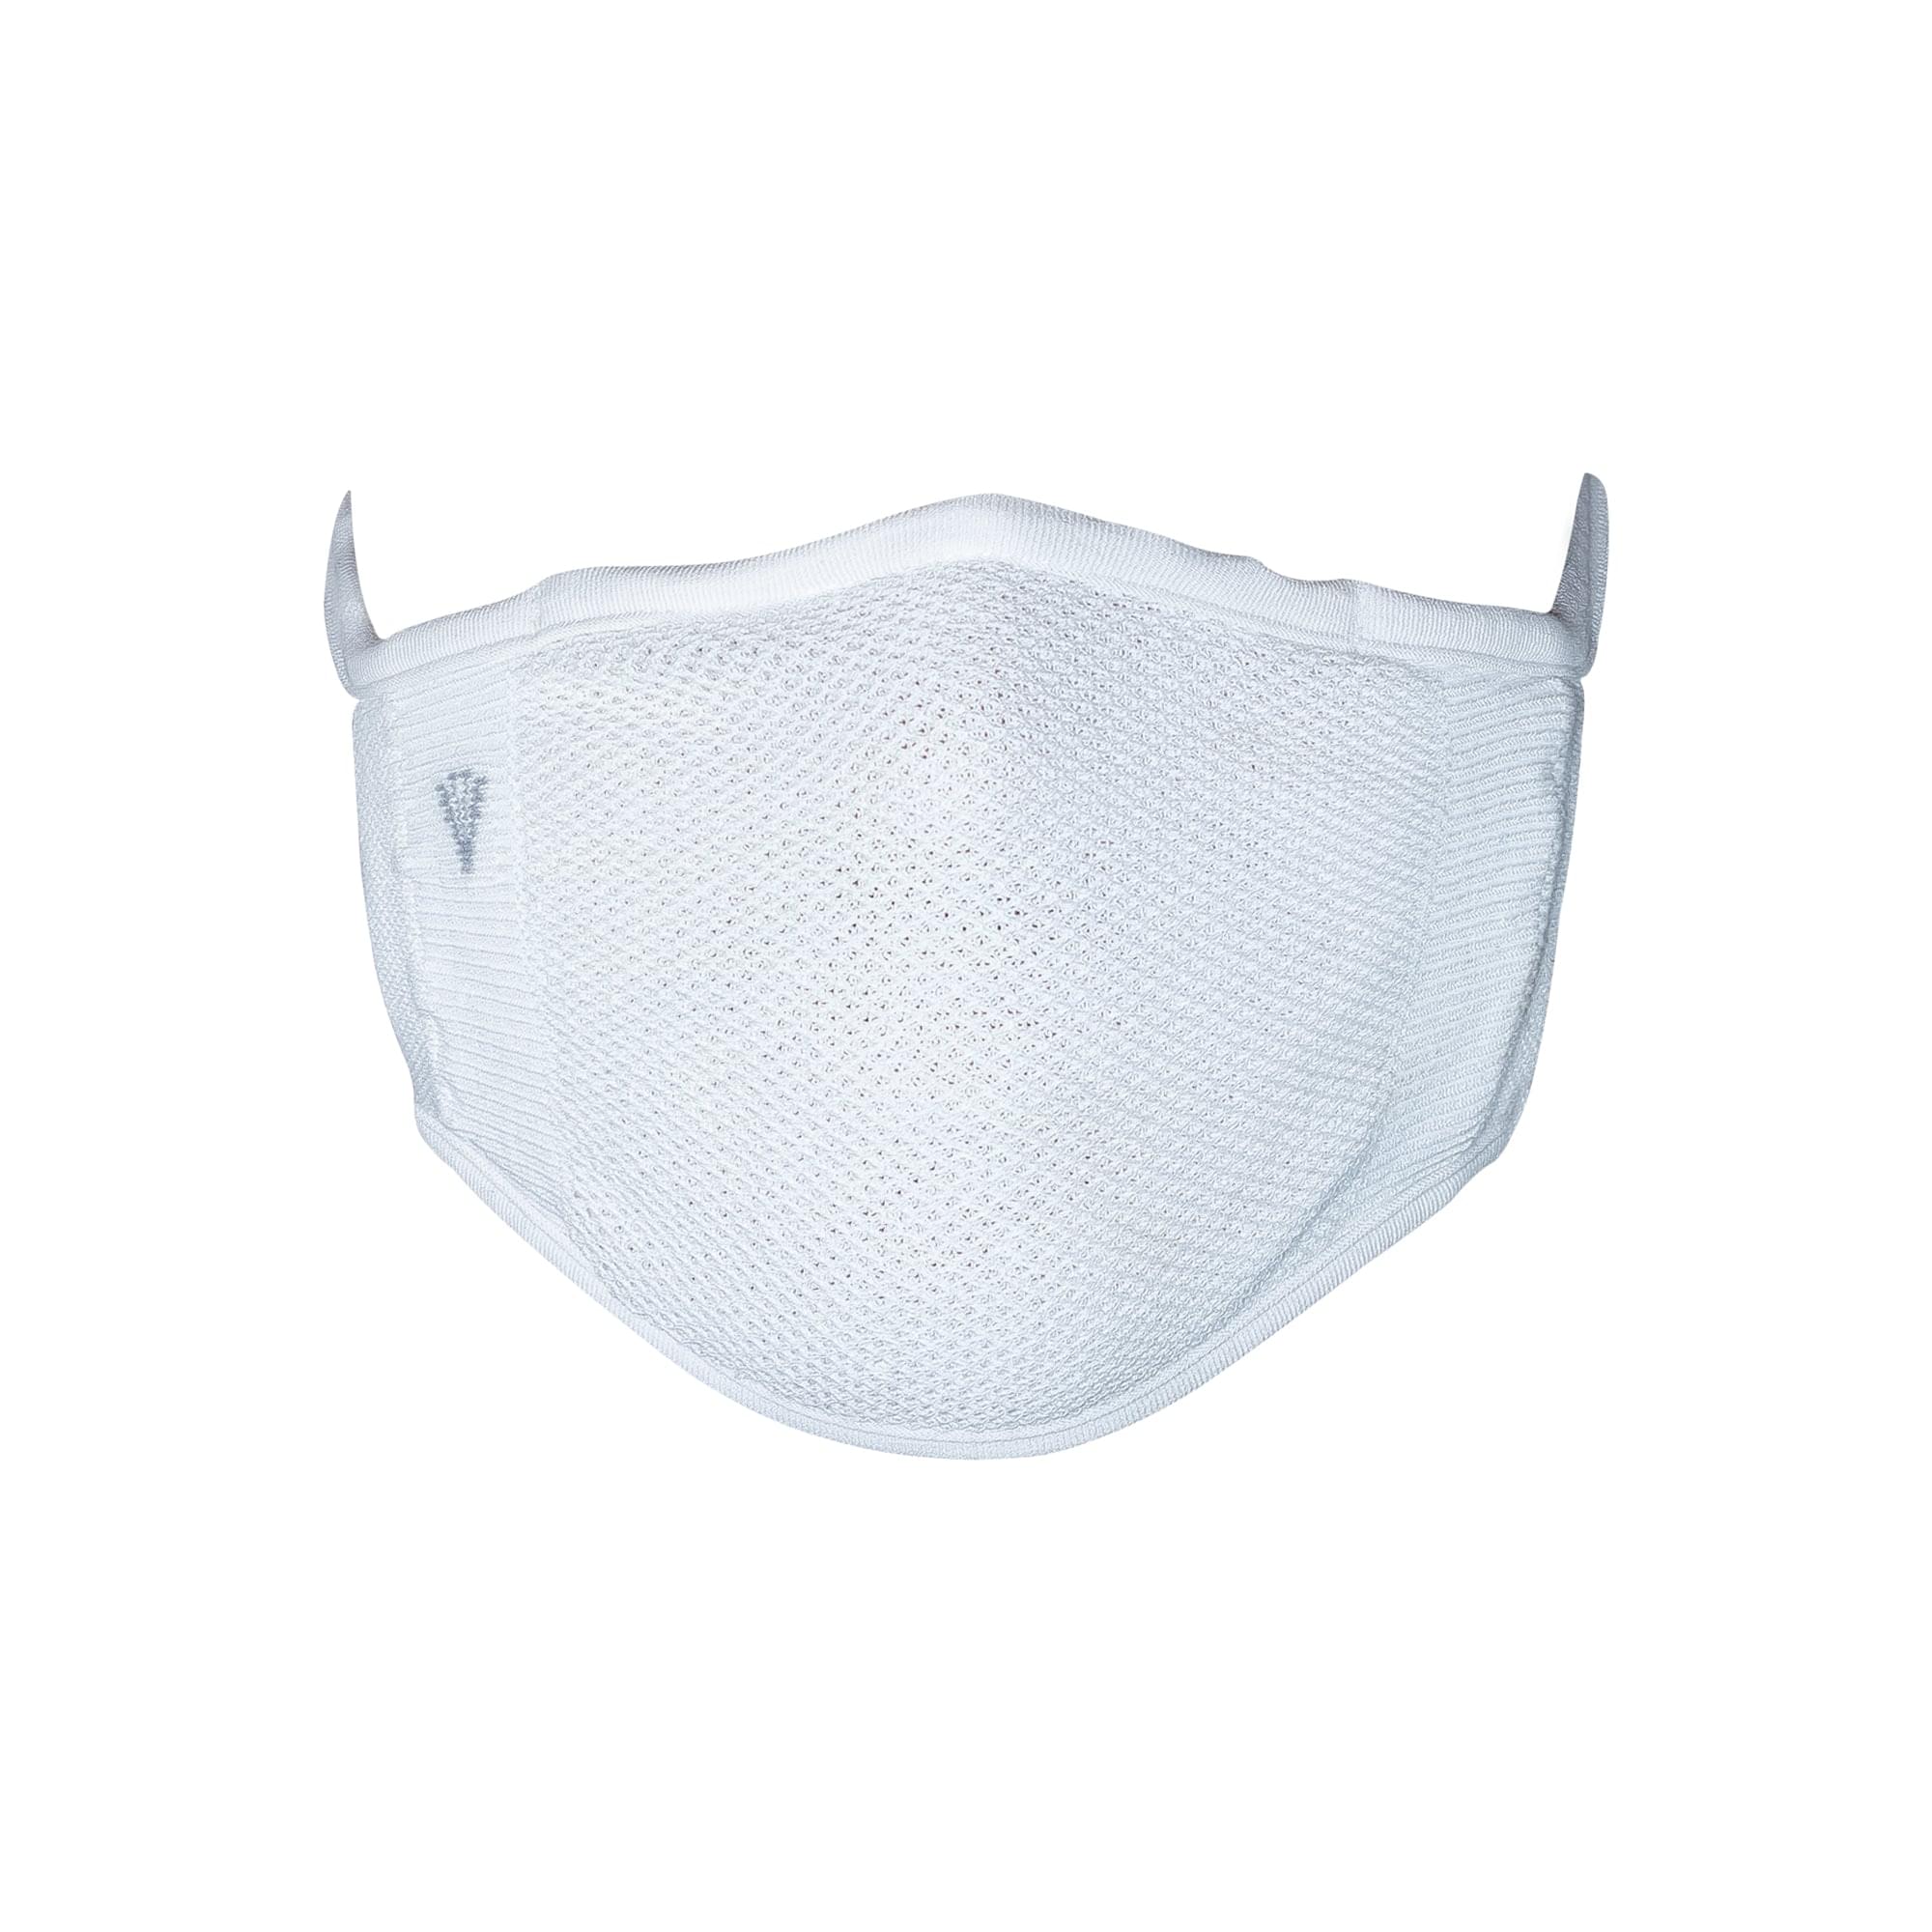 2-Layer Antibacterial Protection Mask for Adults (Unisex) - Pack of 1